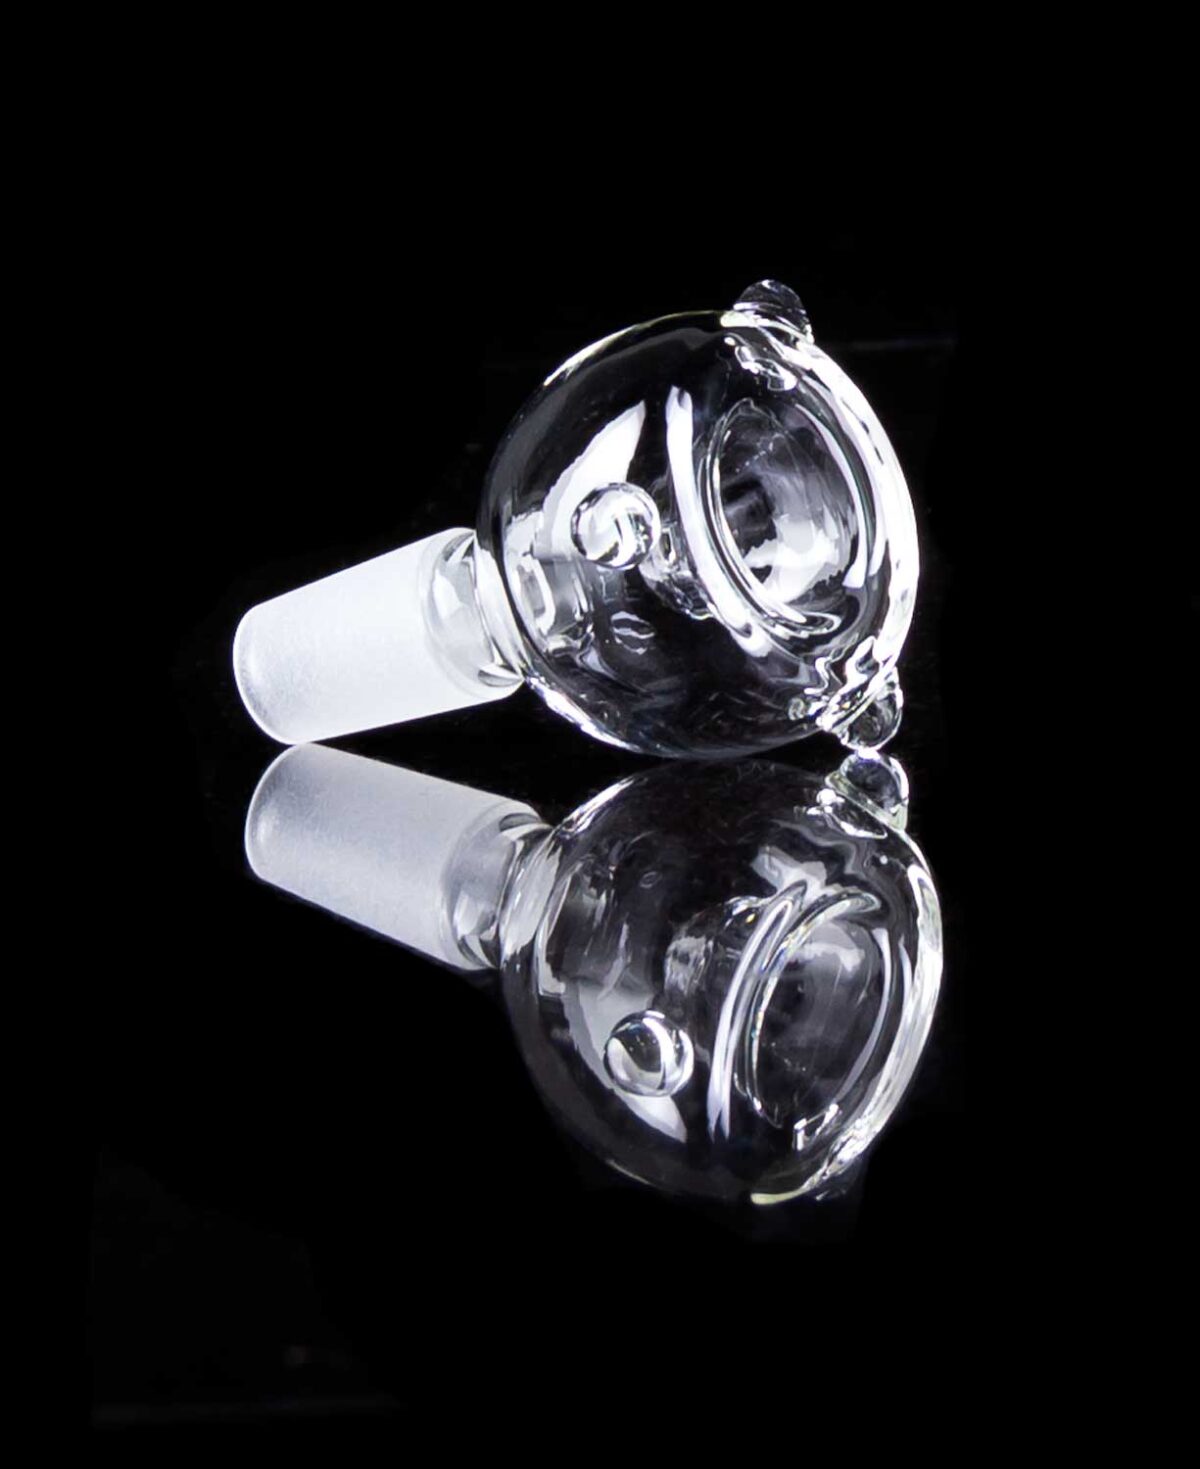 14mm bong bowl piece with grips